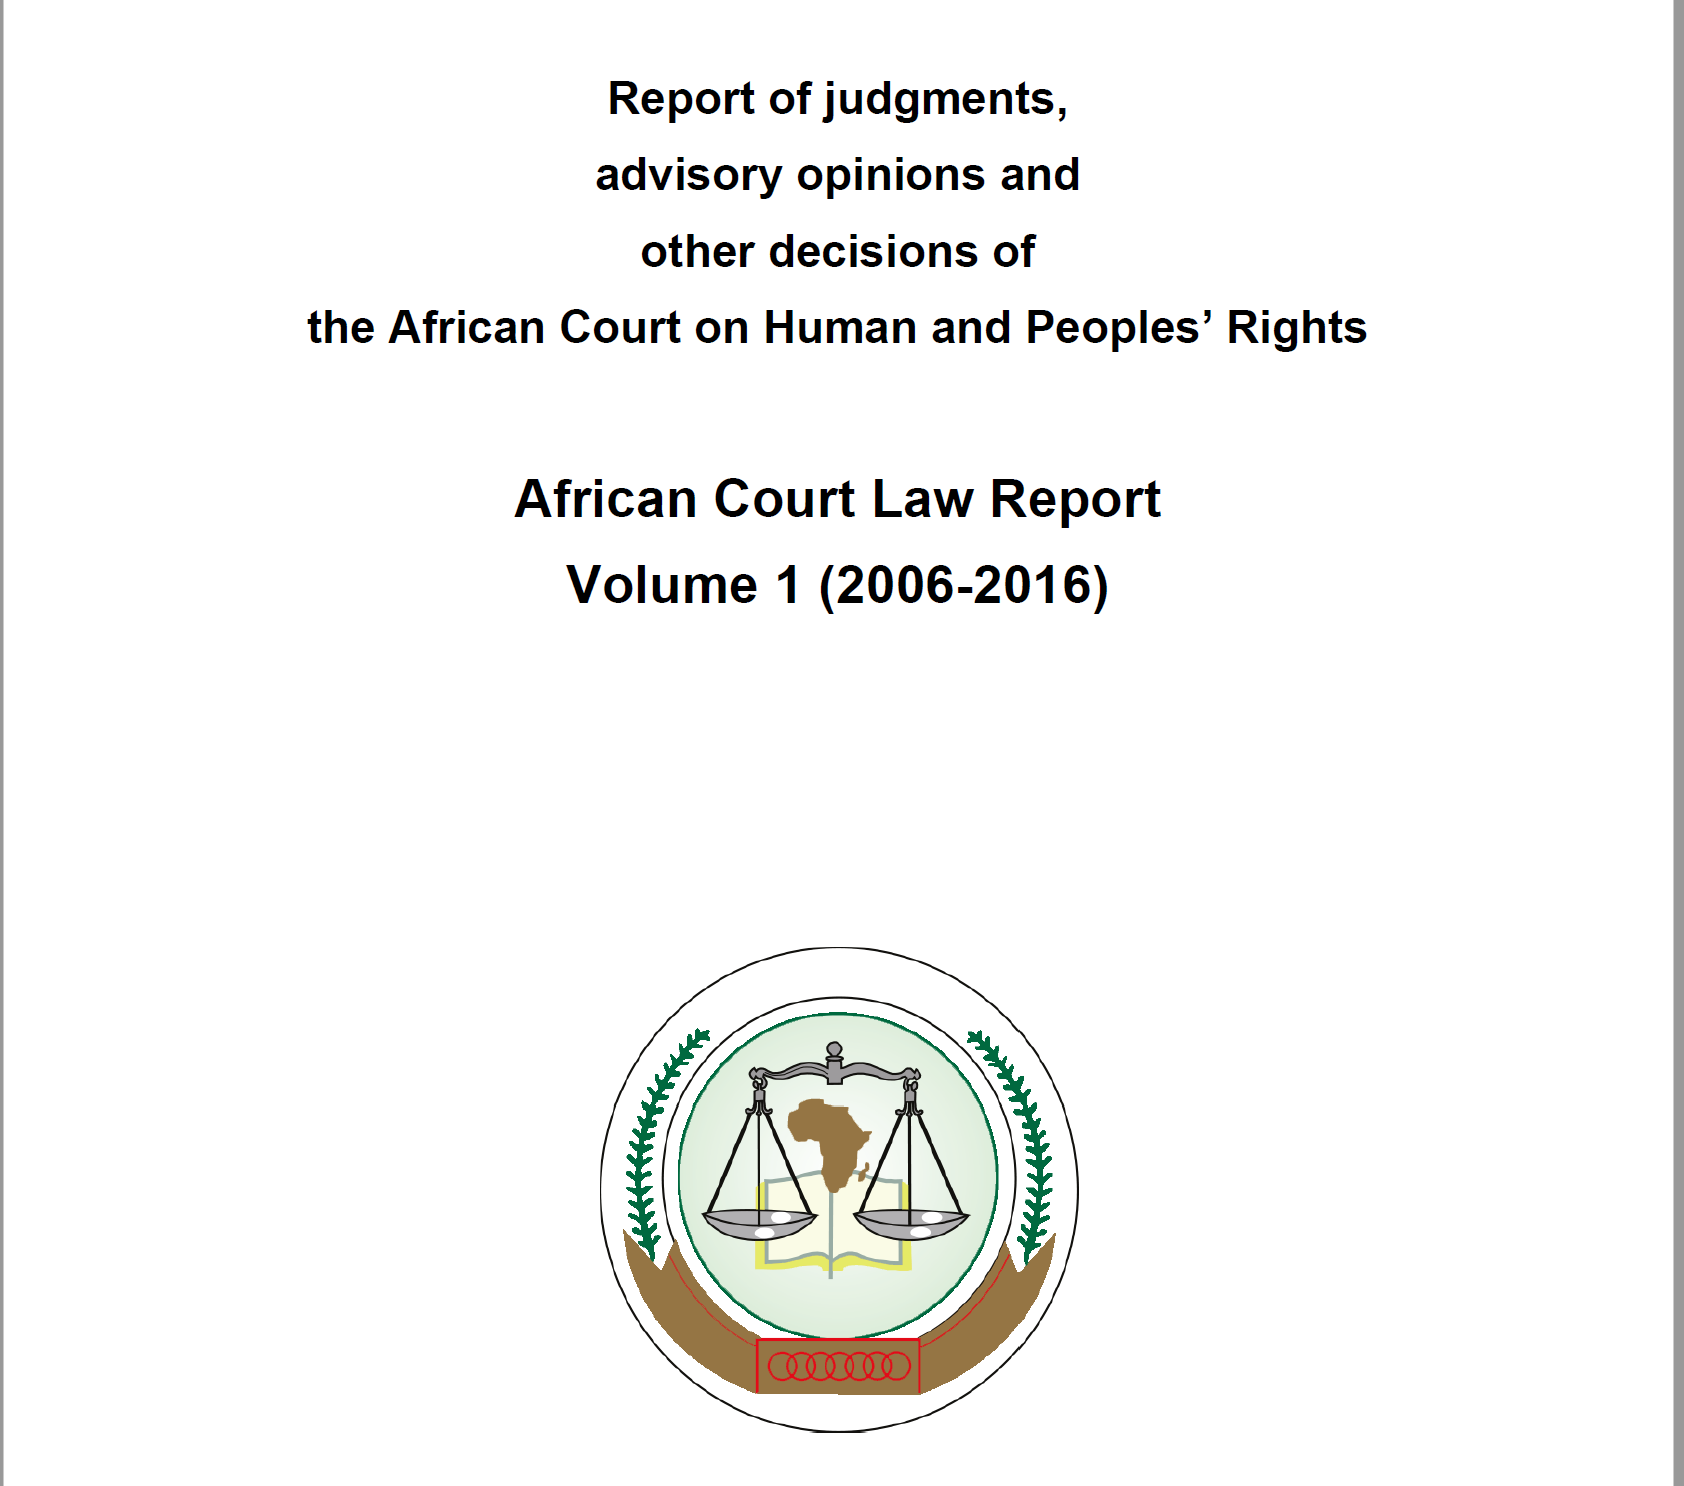 AFRICAN COURT LAW REPORT VOLUME 1 (2006-2016)